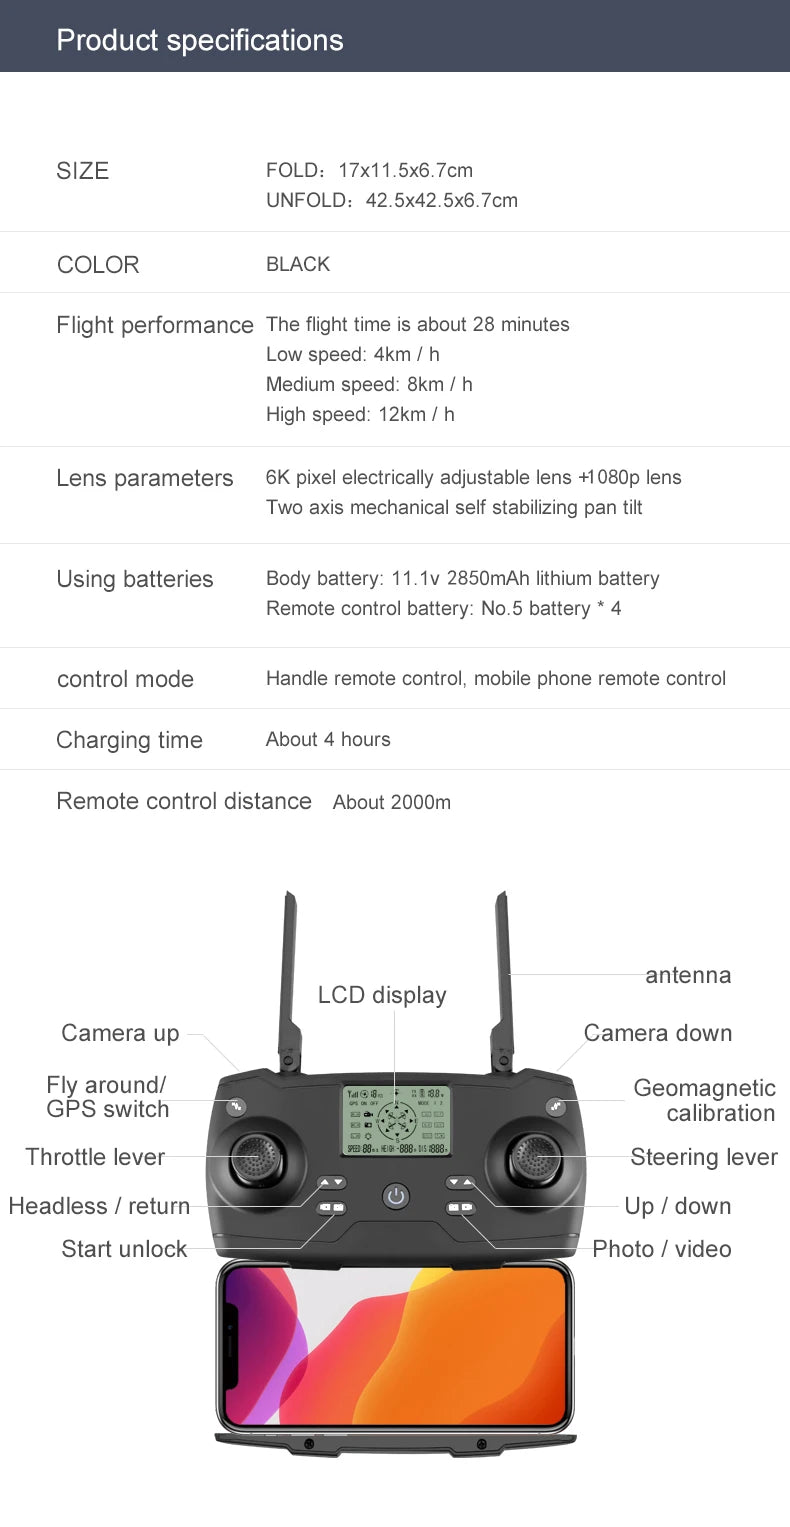 8811 Pro Drone, COLOR BLACK Flight performance The flight time is about 28 minutes Low speed: 4km Medium